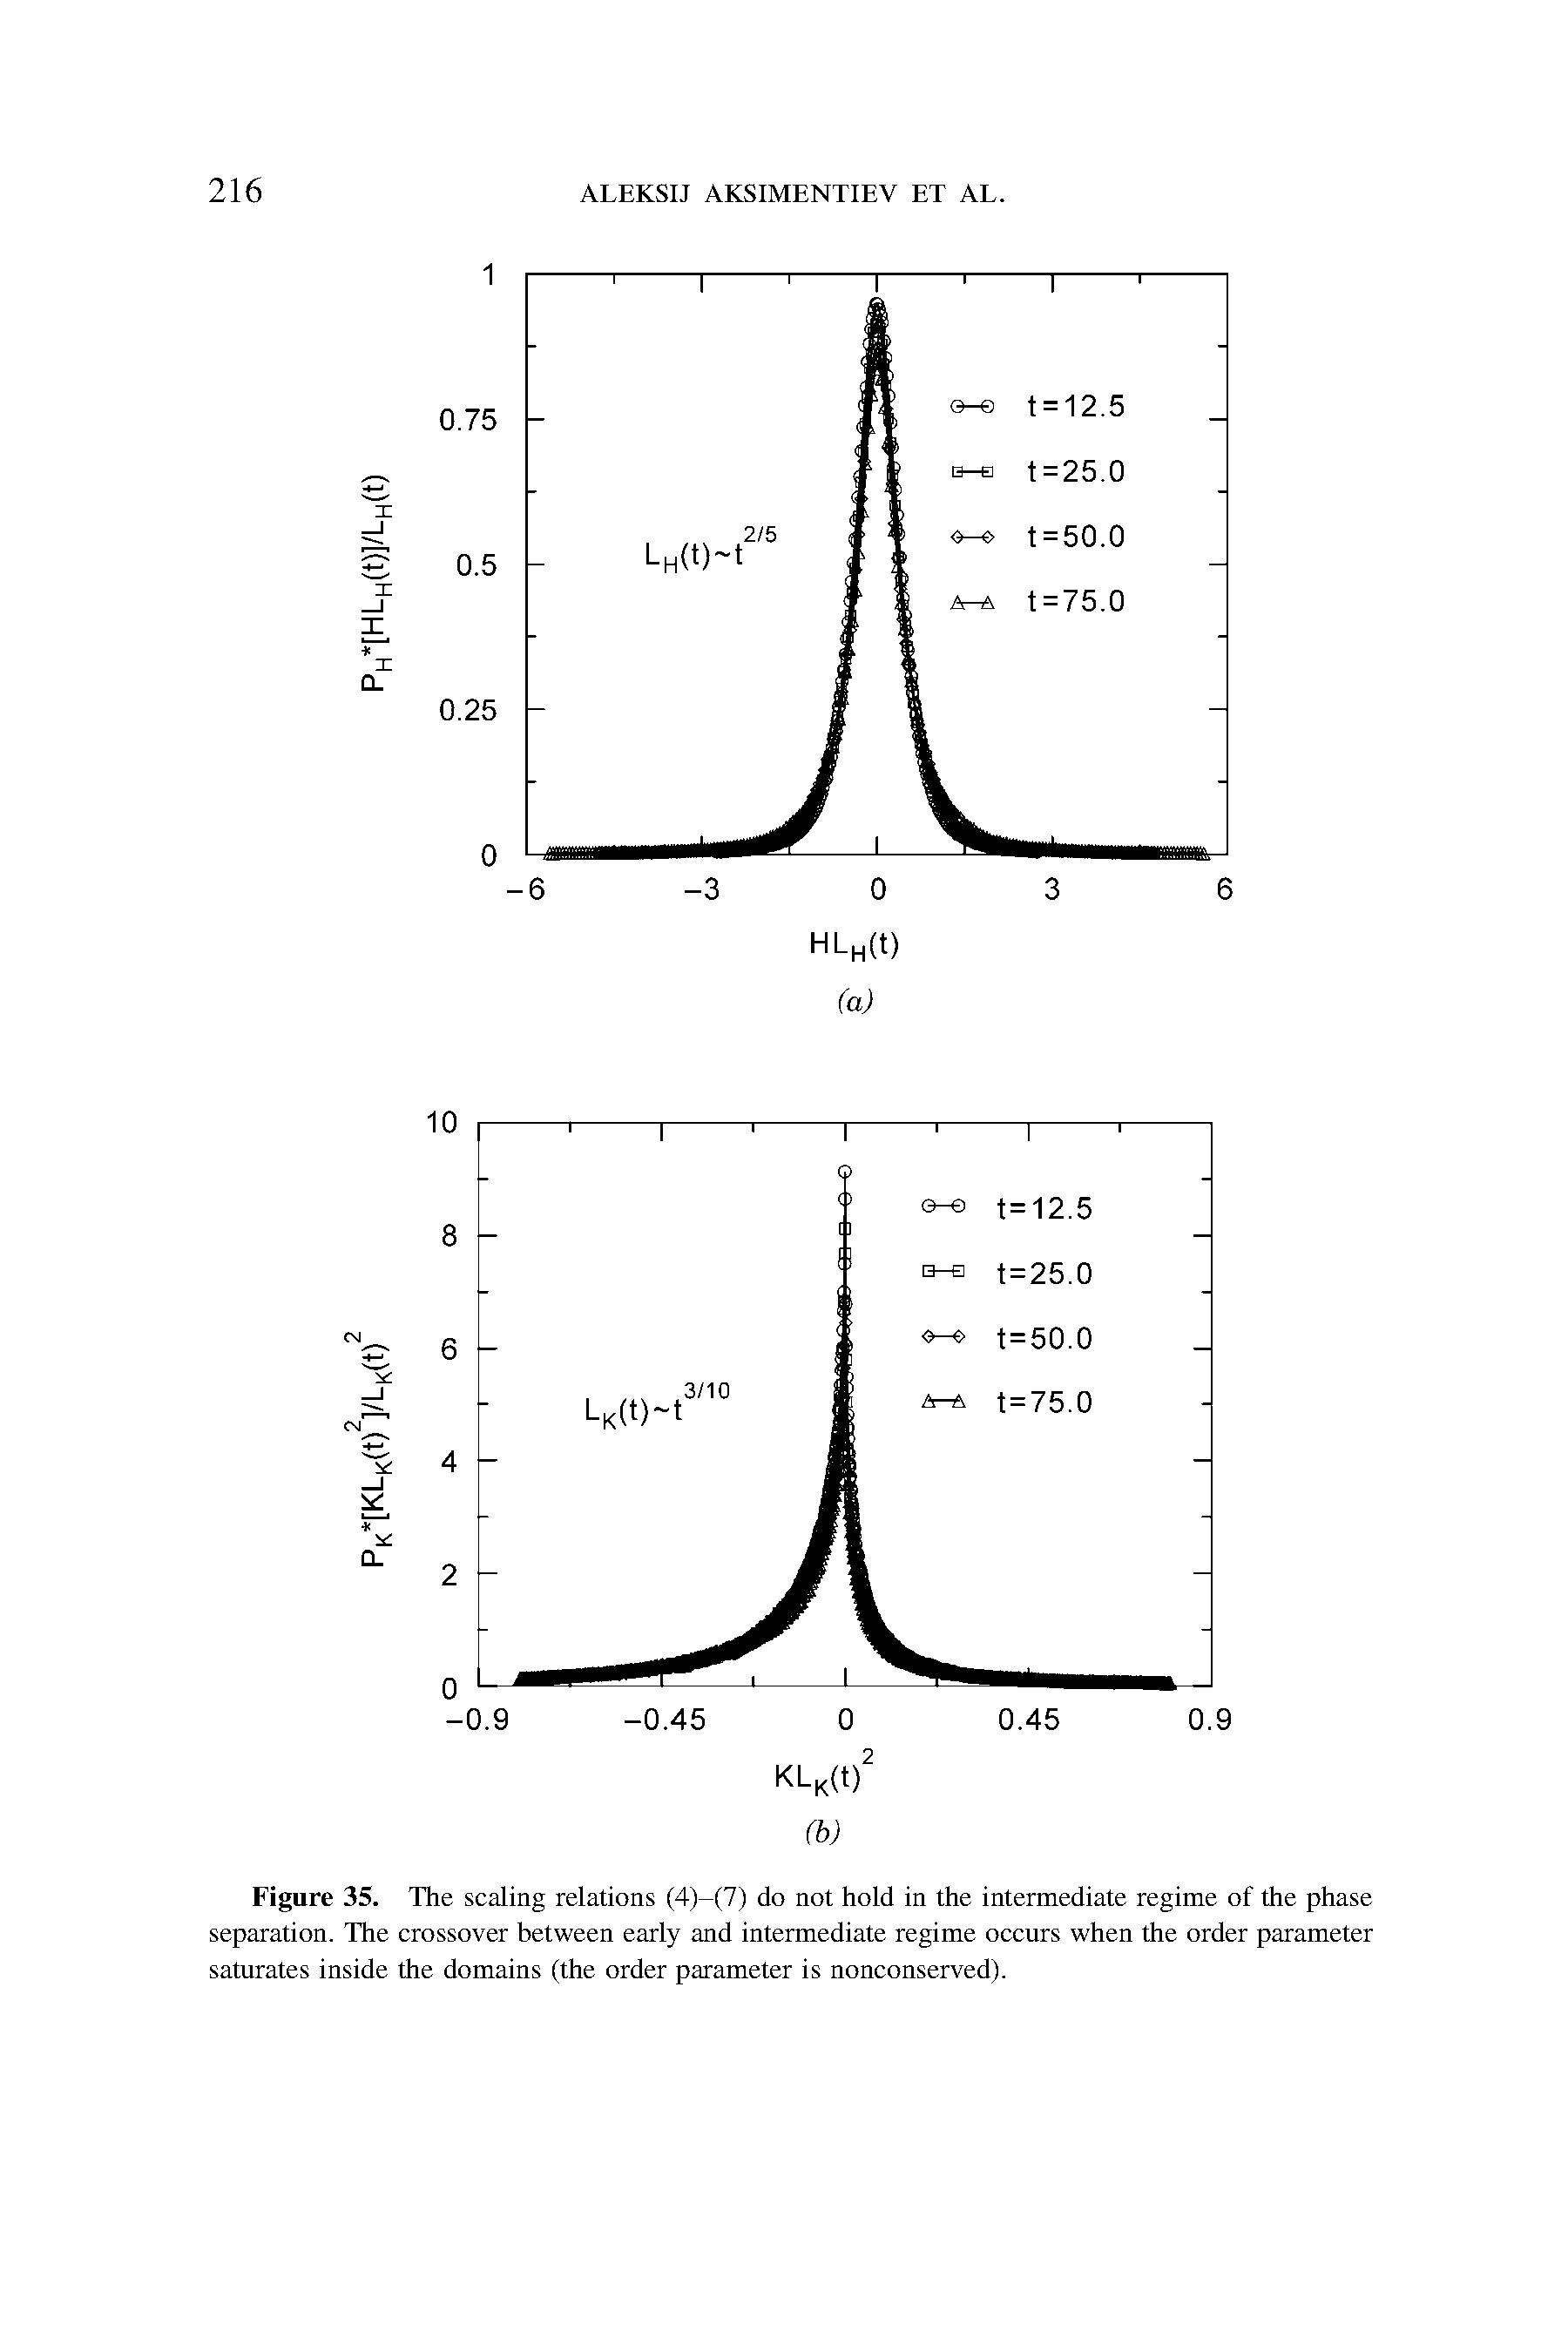 Figure 35. The scaling relations (4)—(7) do not hold in the intermediate regime of the phase separation. The crossover between early and intermediate regime occurs when the order parameter saturates inside the domains (the order parameter is nonconserved).